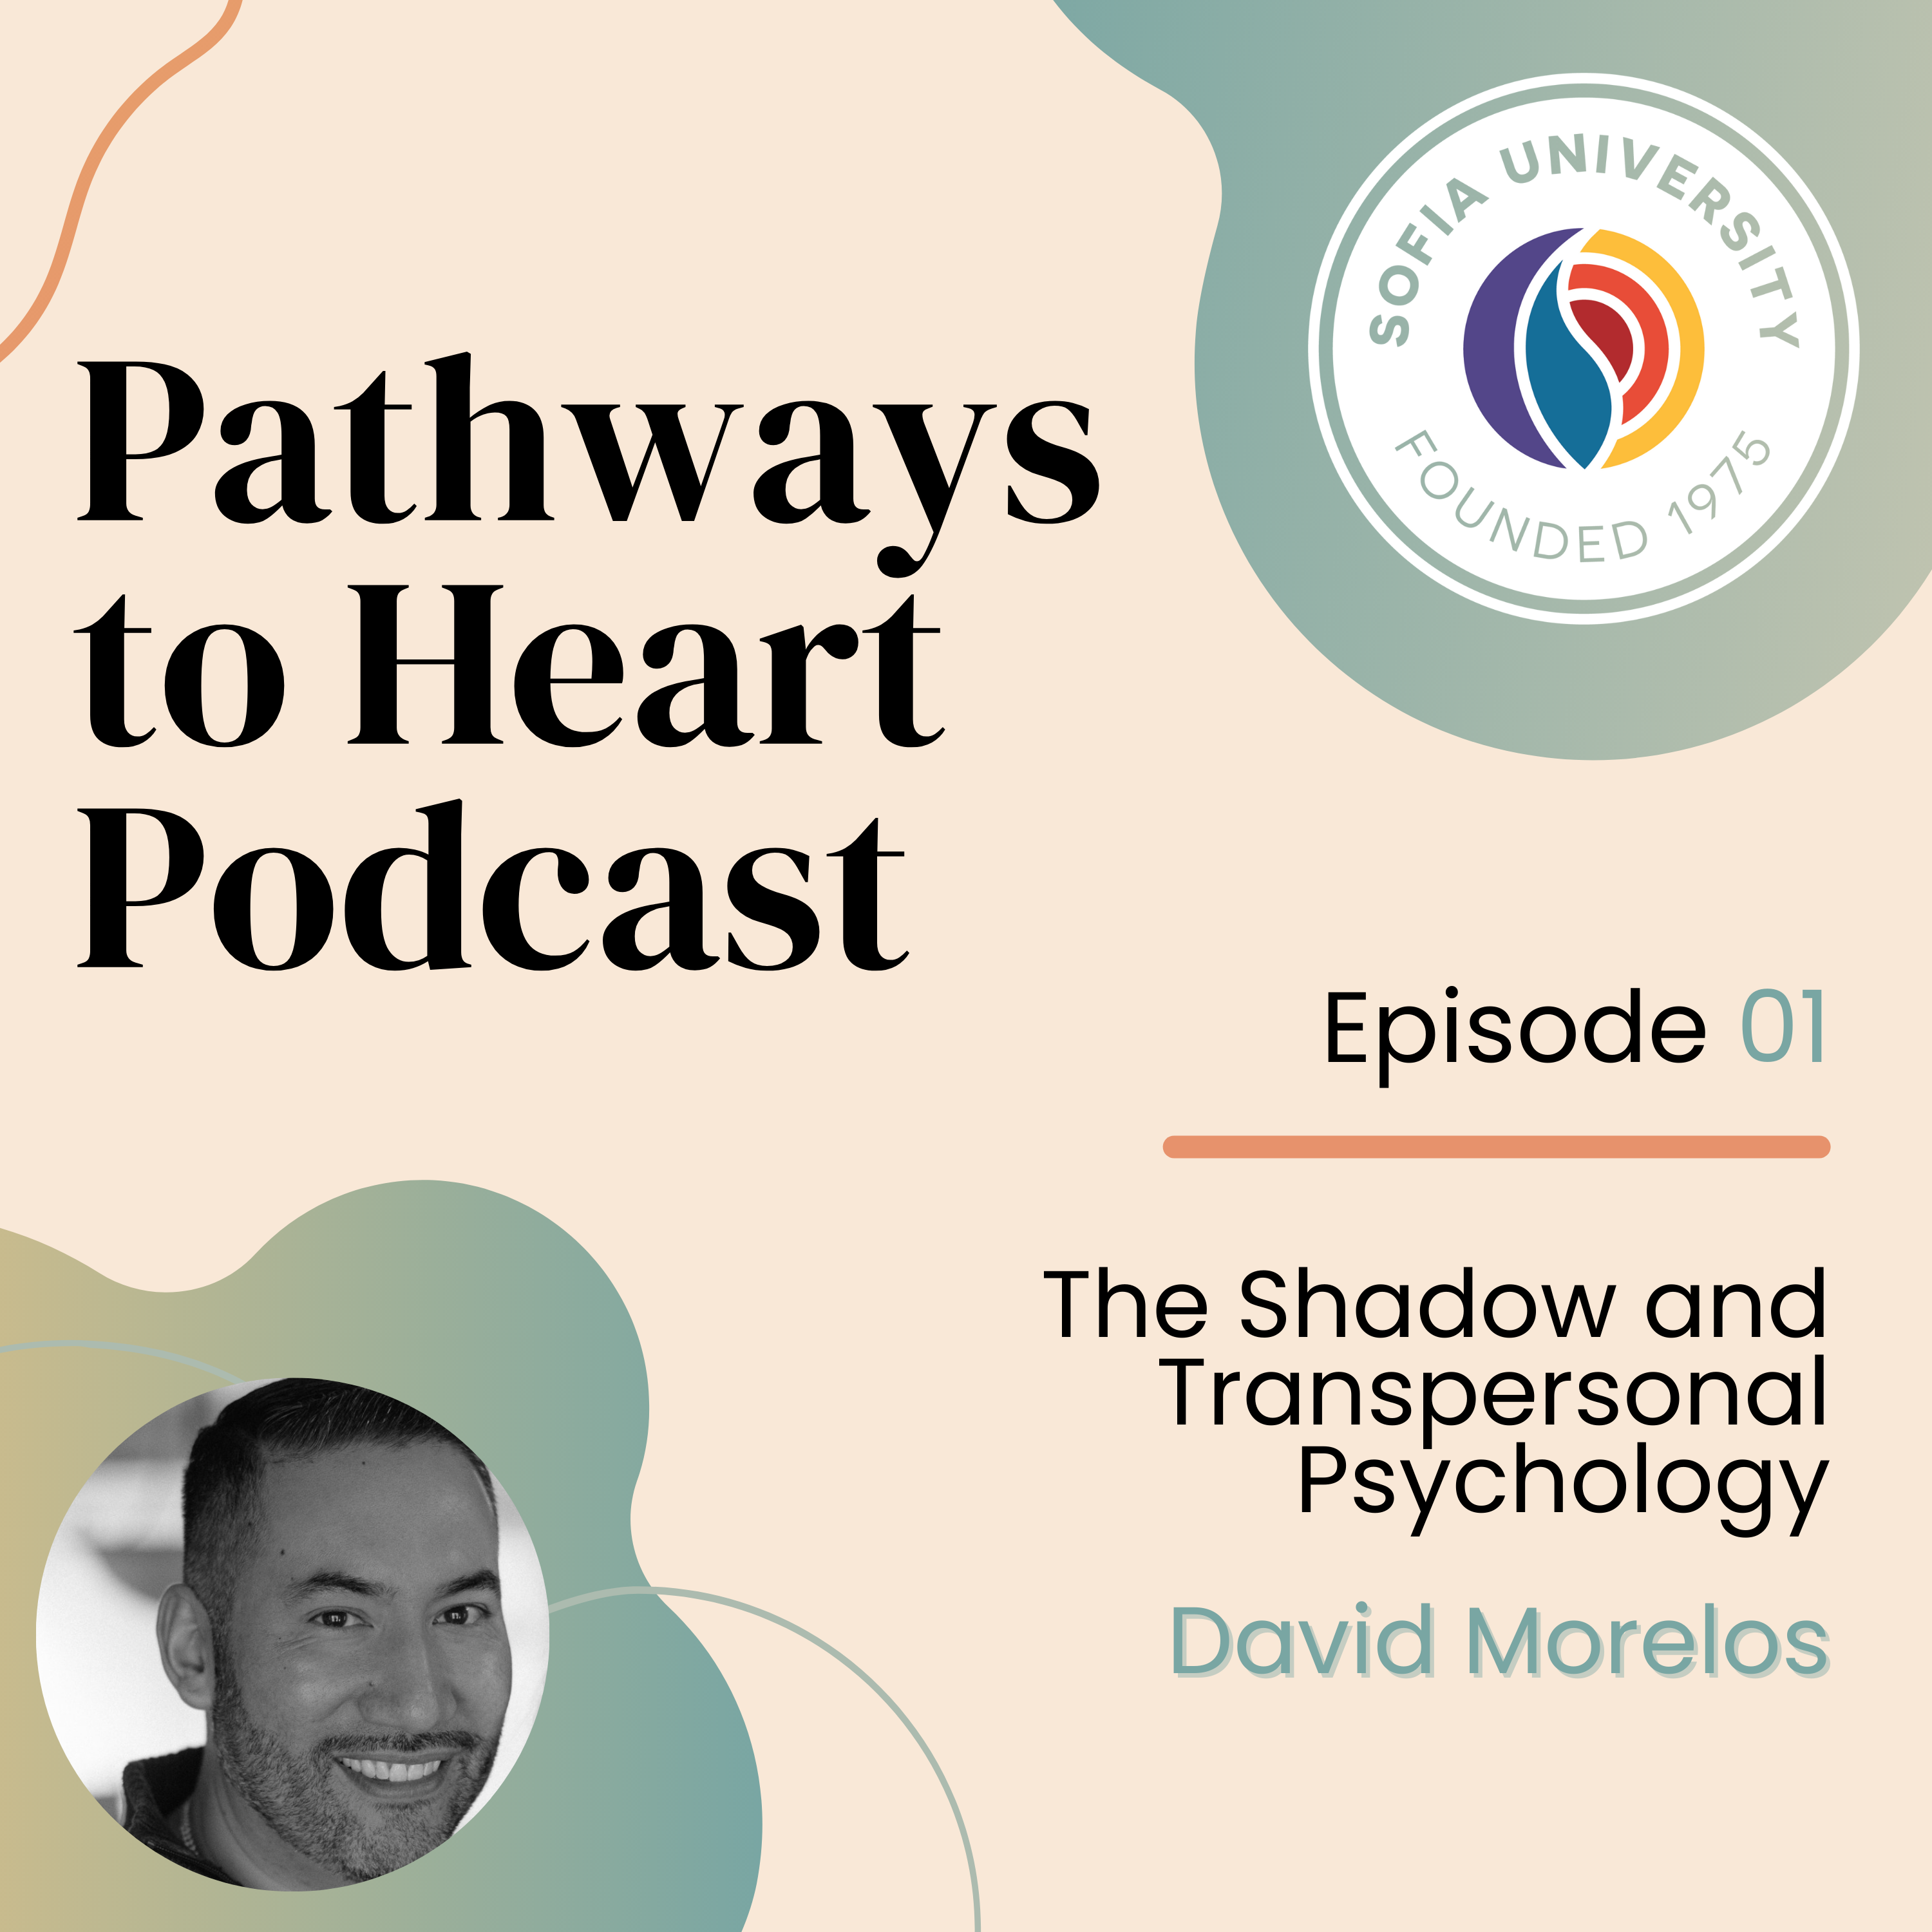 The Shadow and Transpersonal Psychology